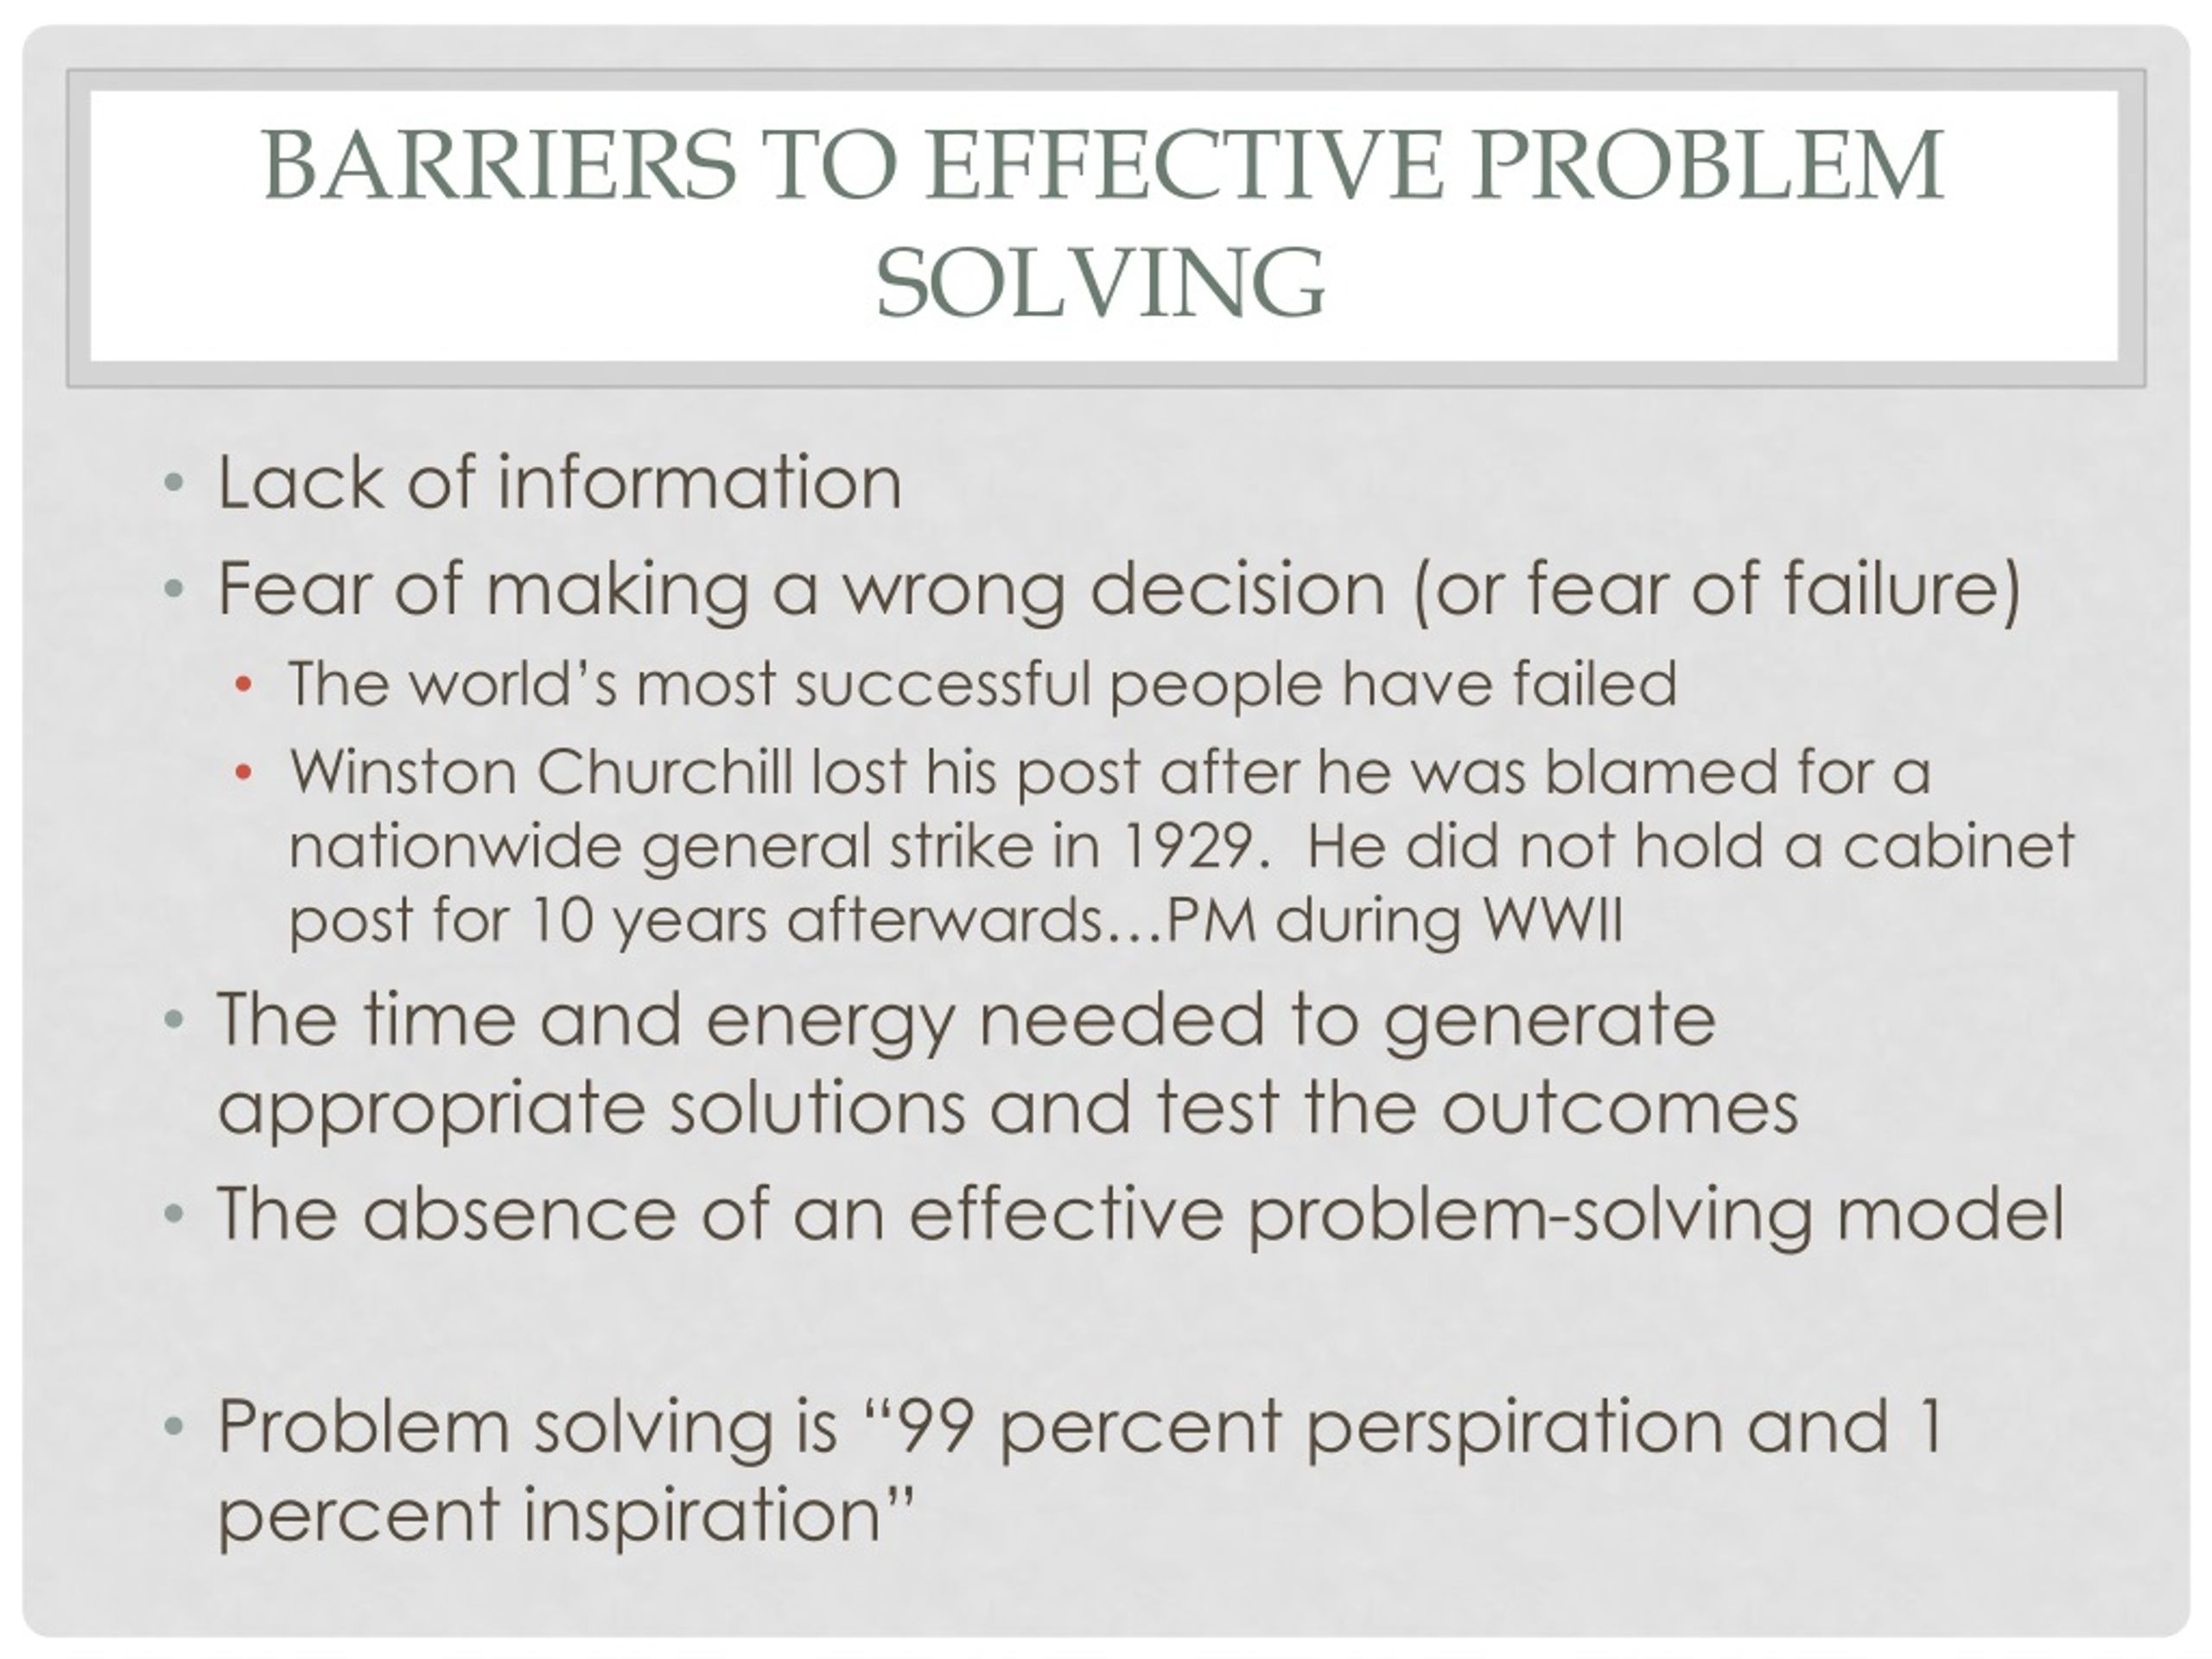 one of the most common barriers to problem solving is